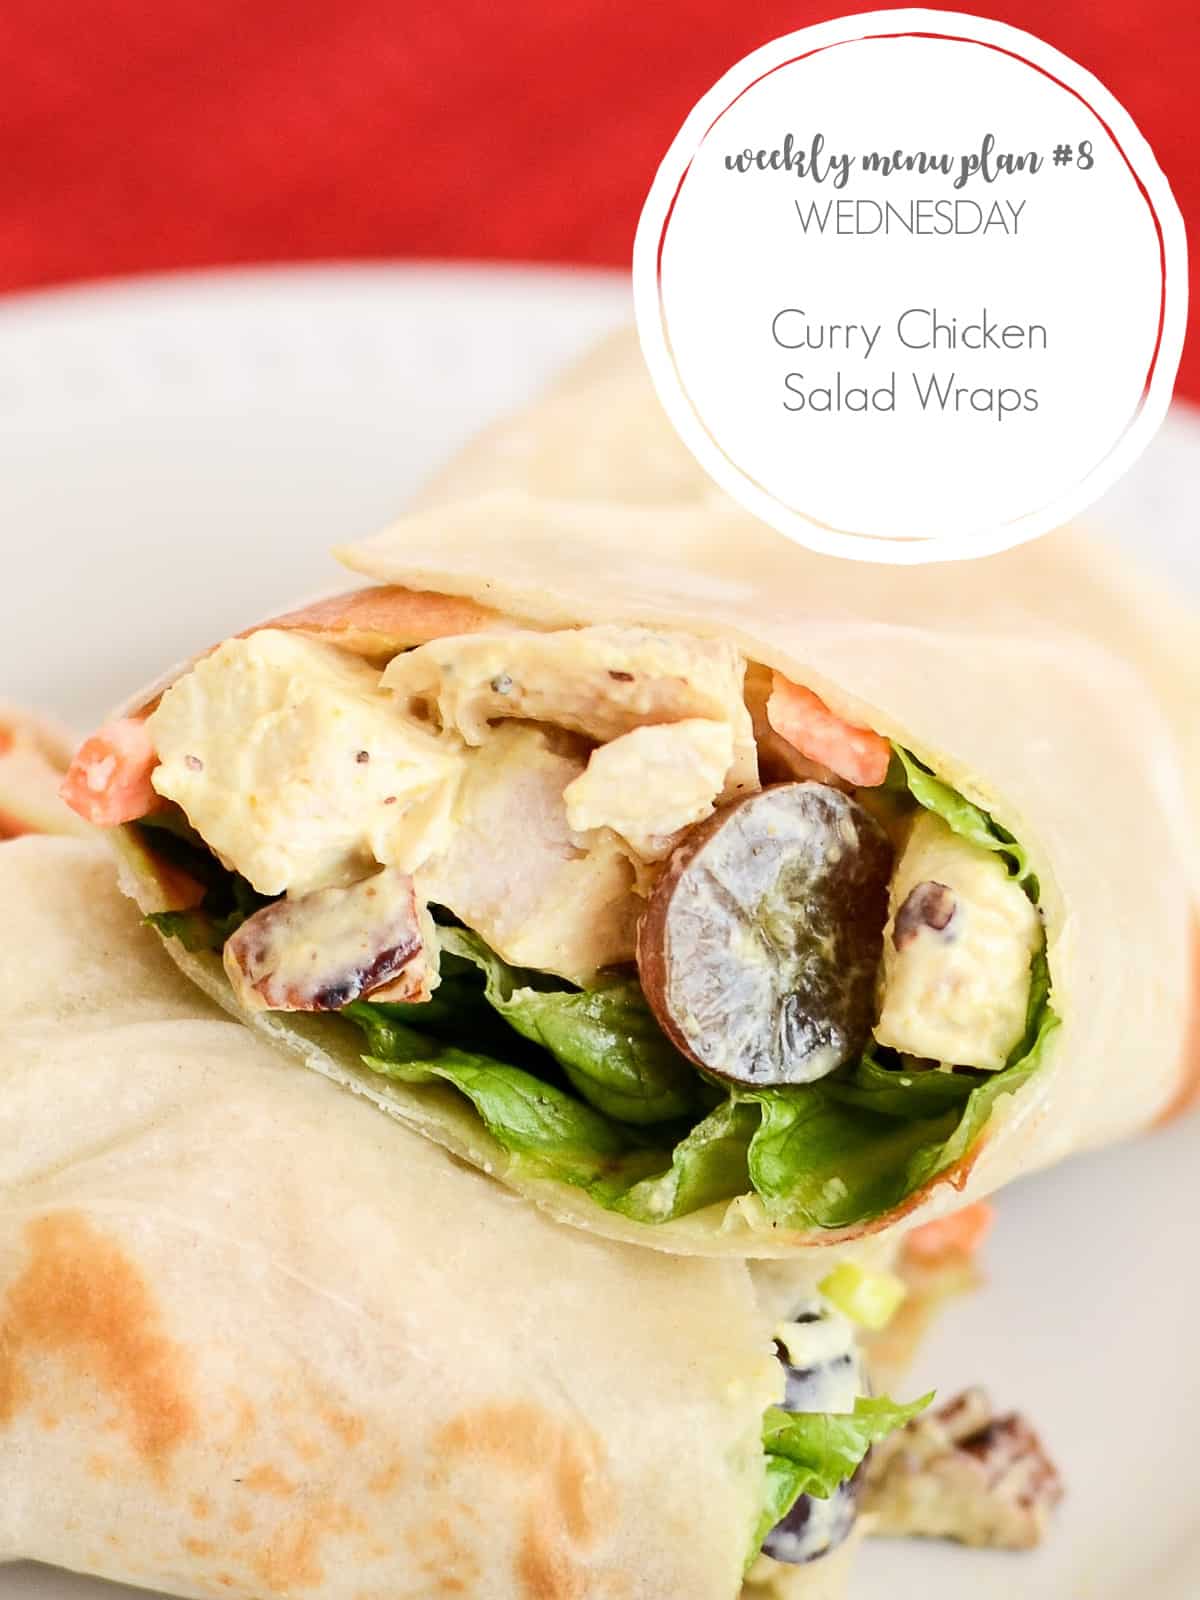 curry chicken wraps for weekly menu plan #8